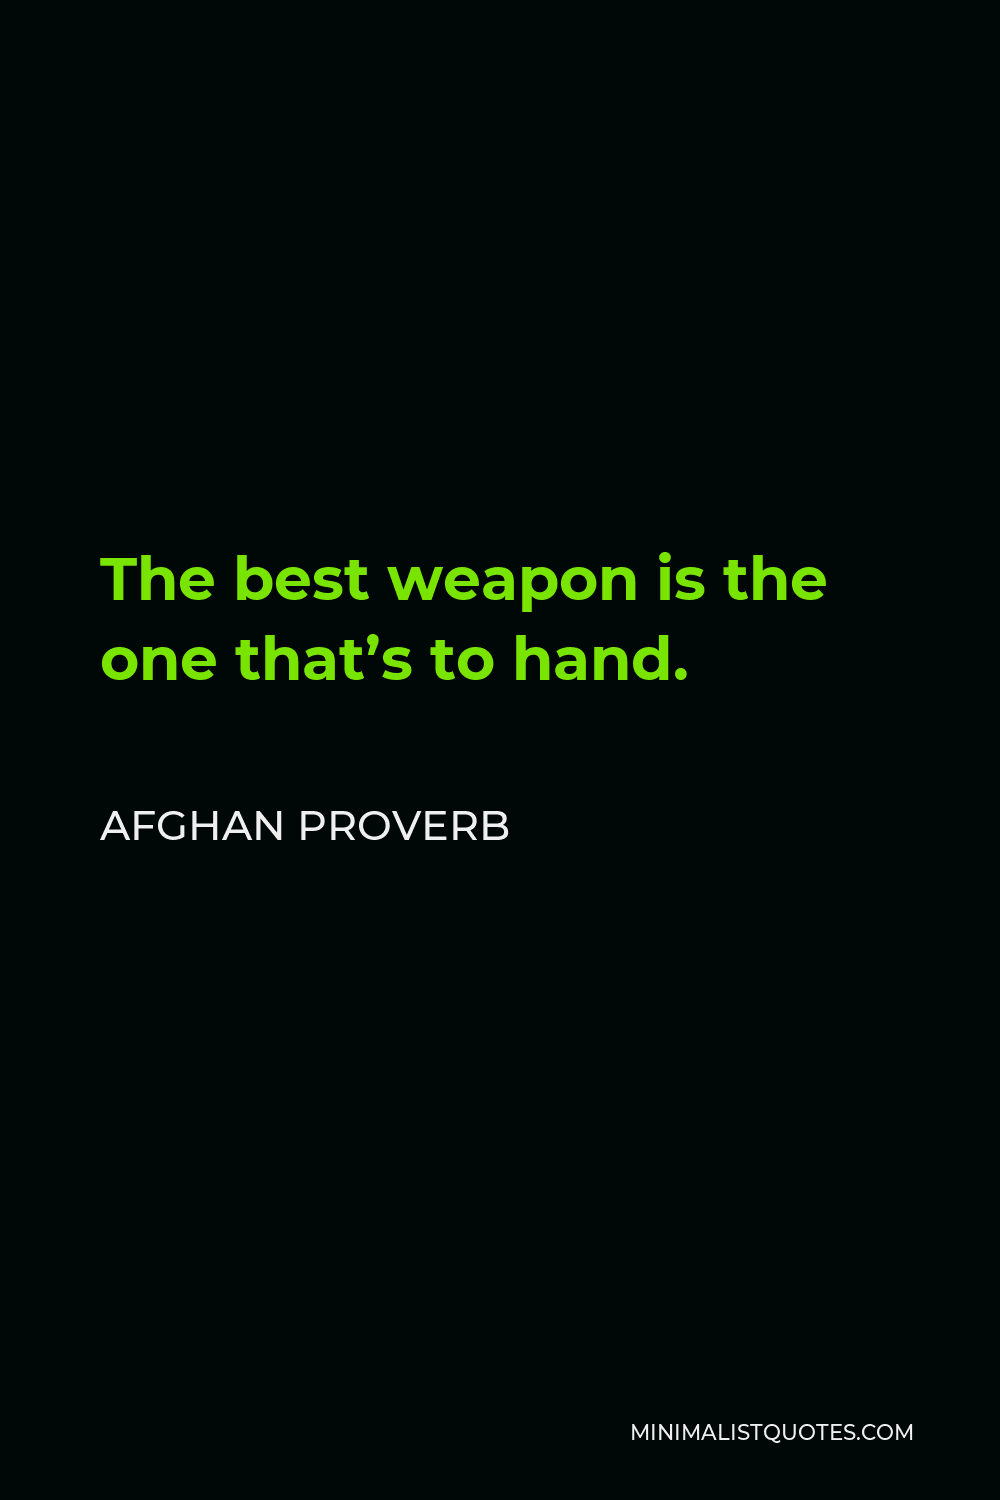 Afghan Proverb Quote - The best weapon is the one that’s to hand.